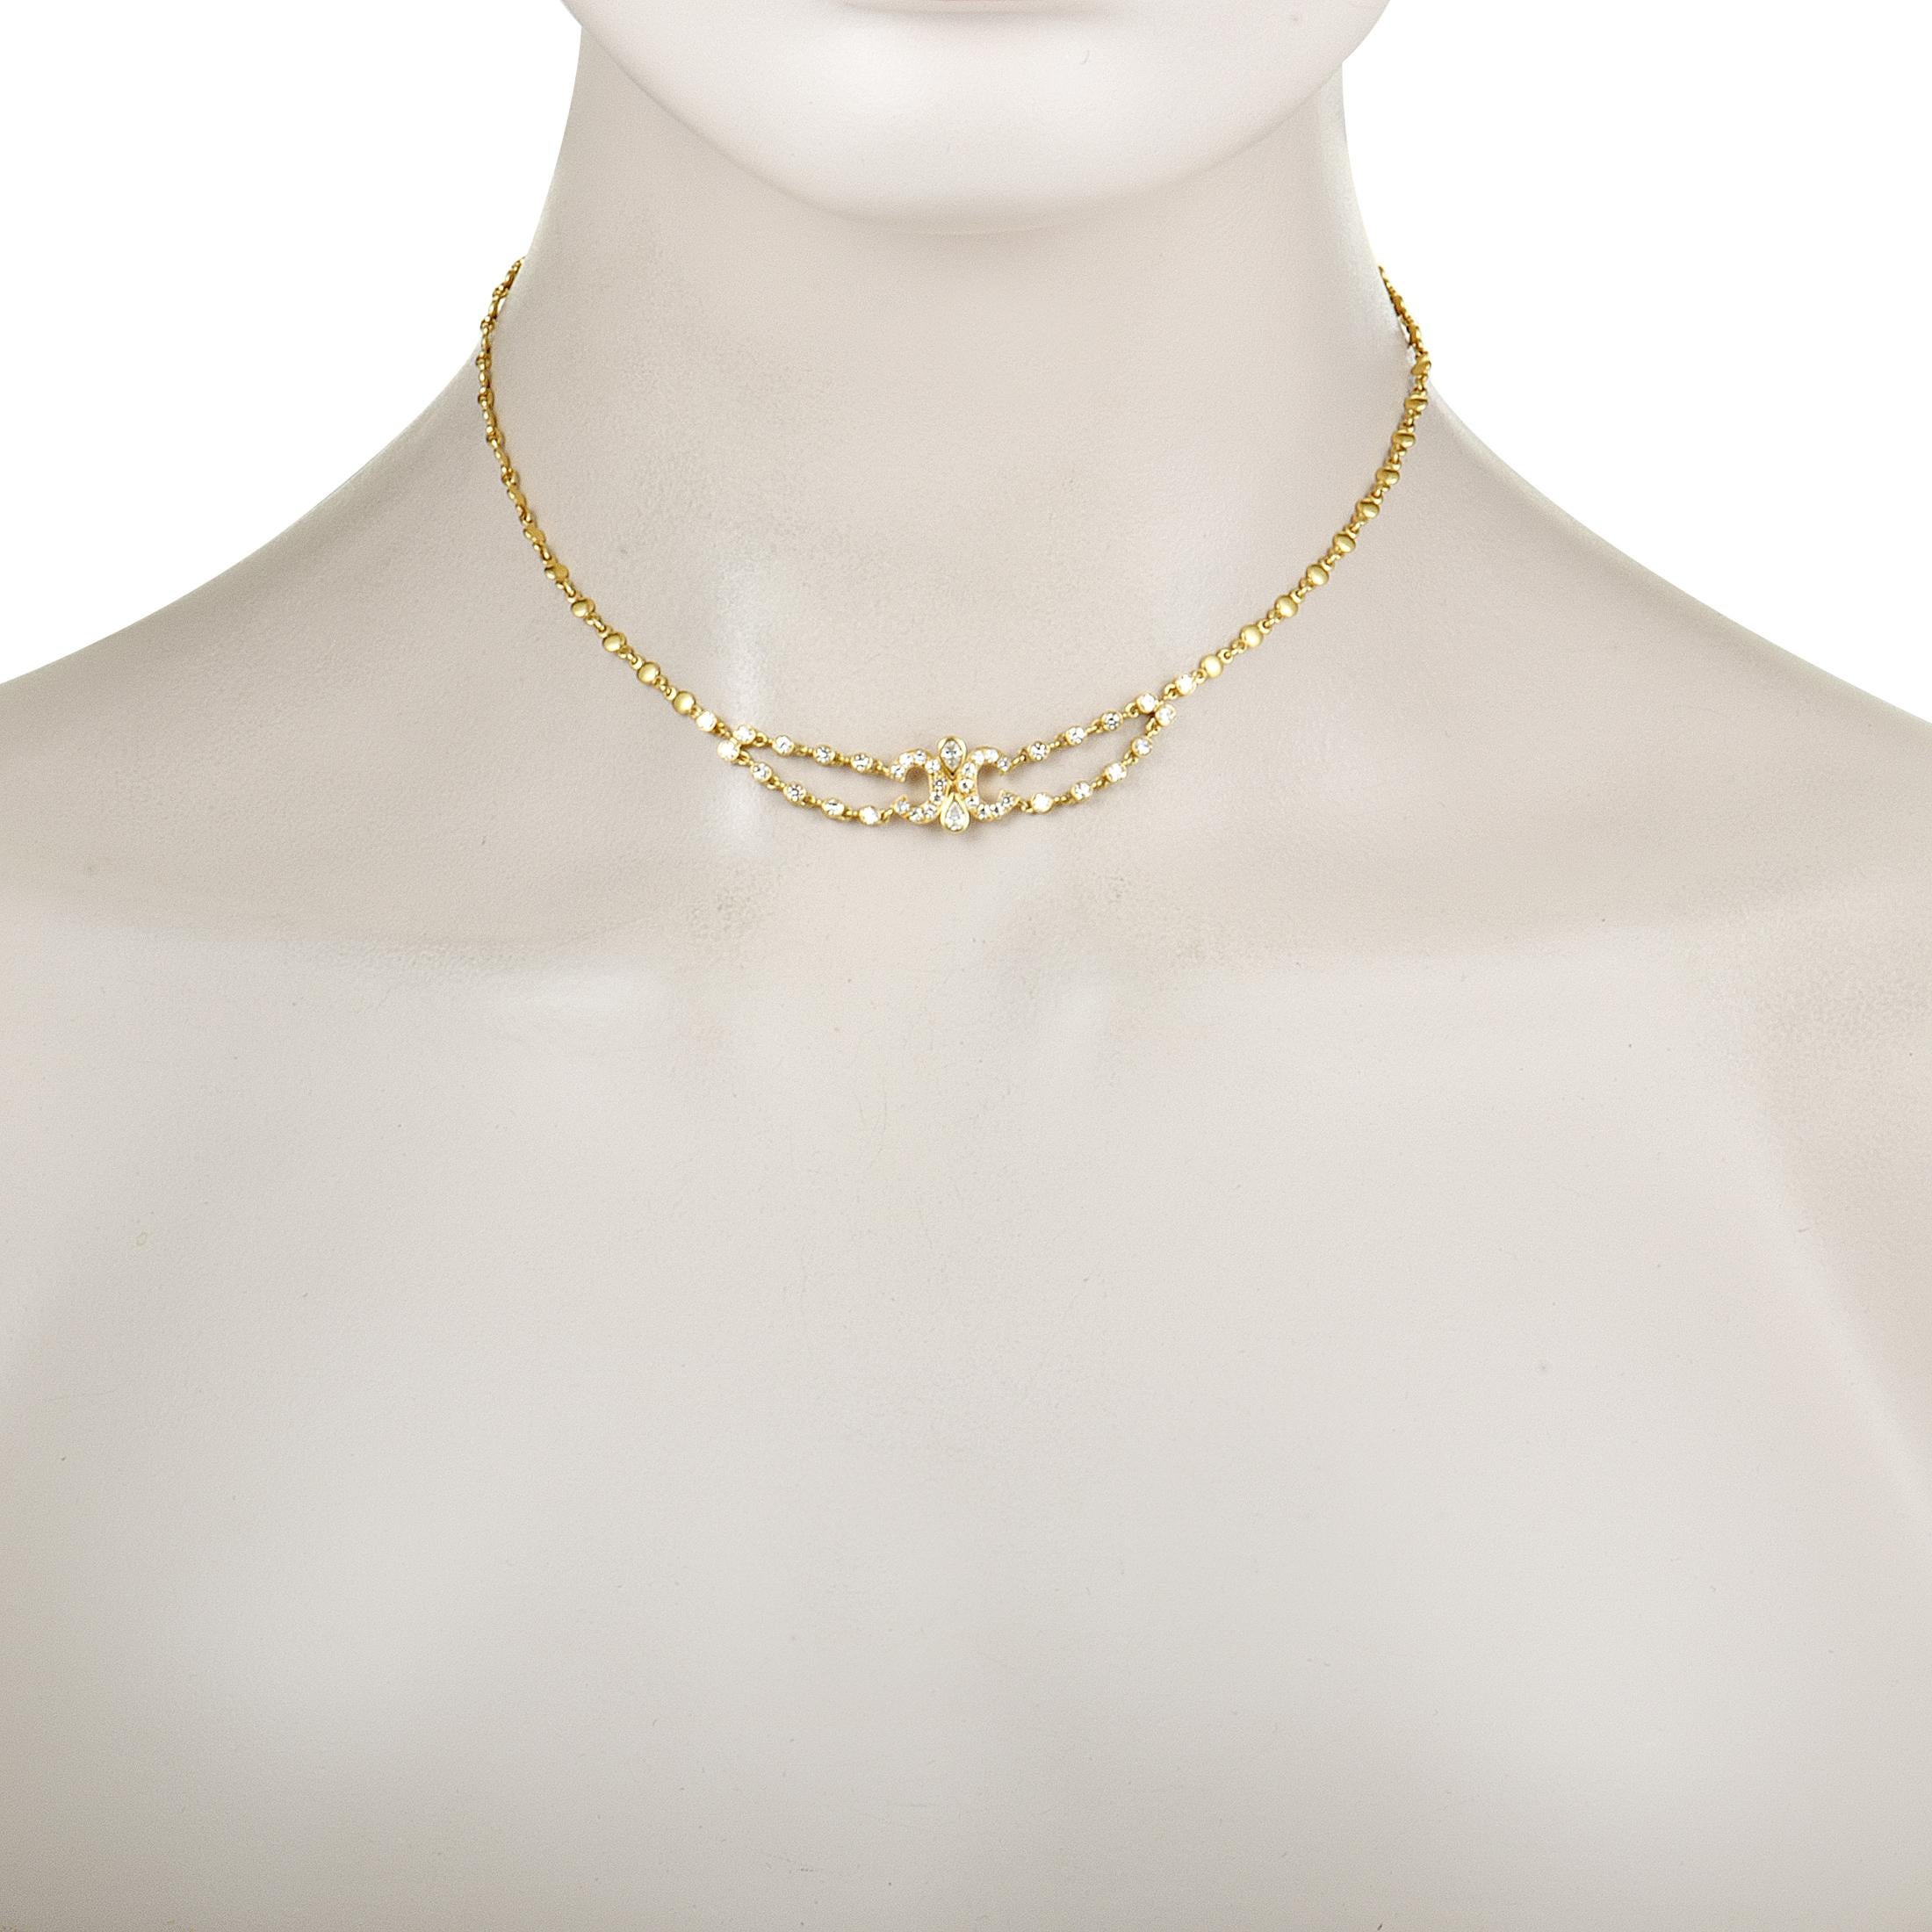 An embodiment of classic elegance, this vintage Cartier necklace boasts a distinctly antique appeal, offering an exceptionally sophisticated look. The necklace is made of luxurious 18K yellow gold and it is embellished with colorless (grade F)